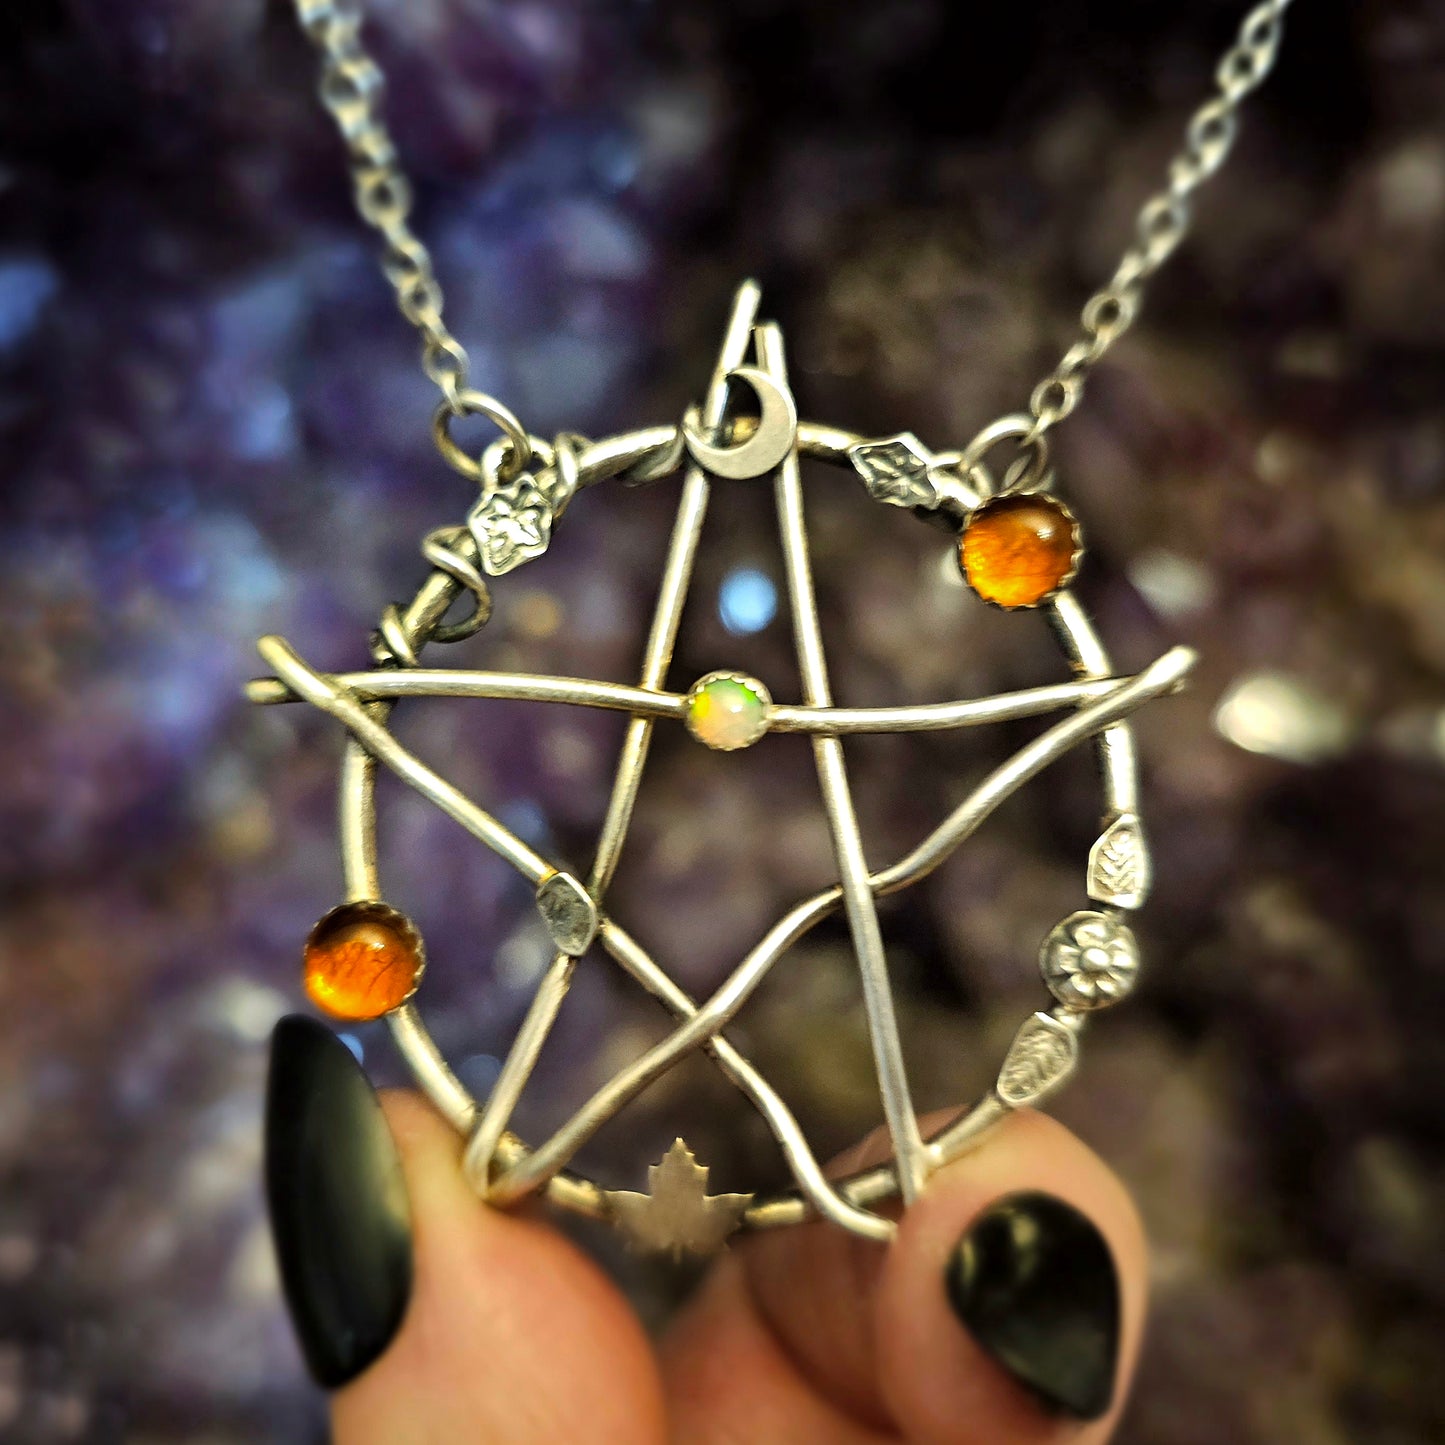 Woods Witch Pentacle 4